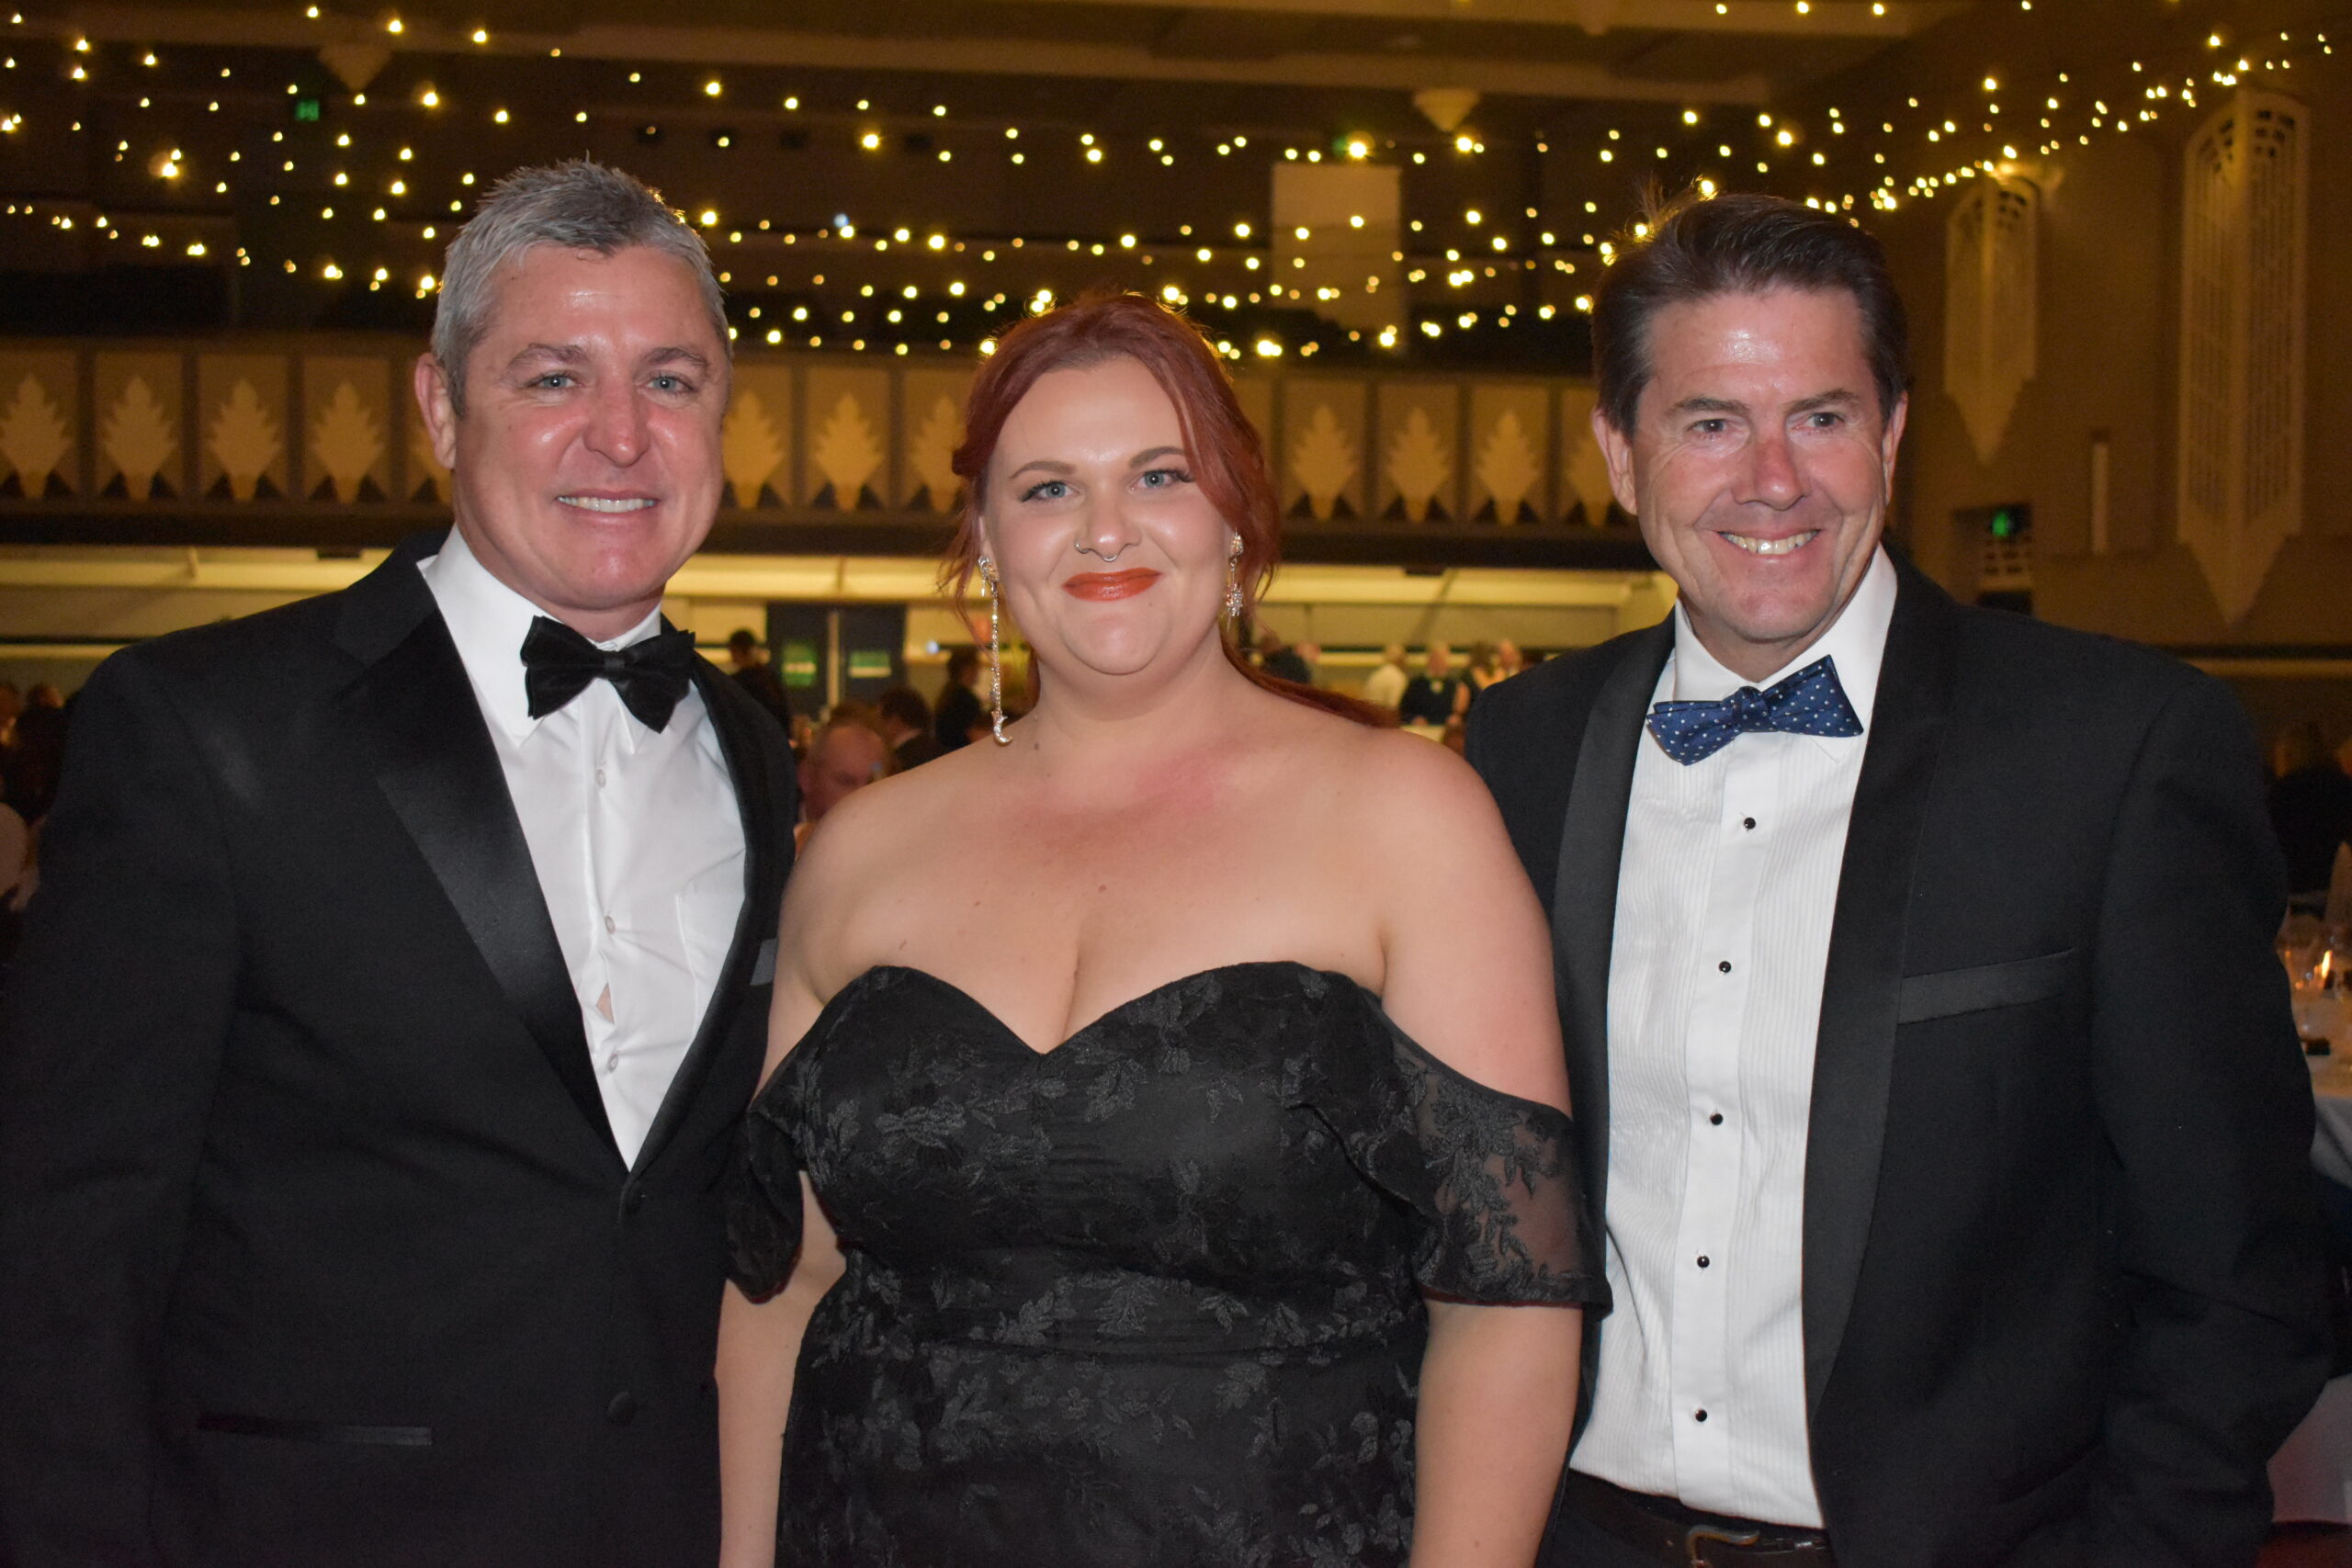 Chamber of Commerce throws gala ball fit for royalty